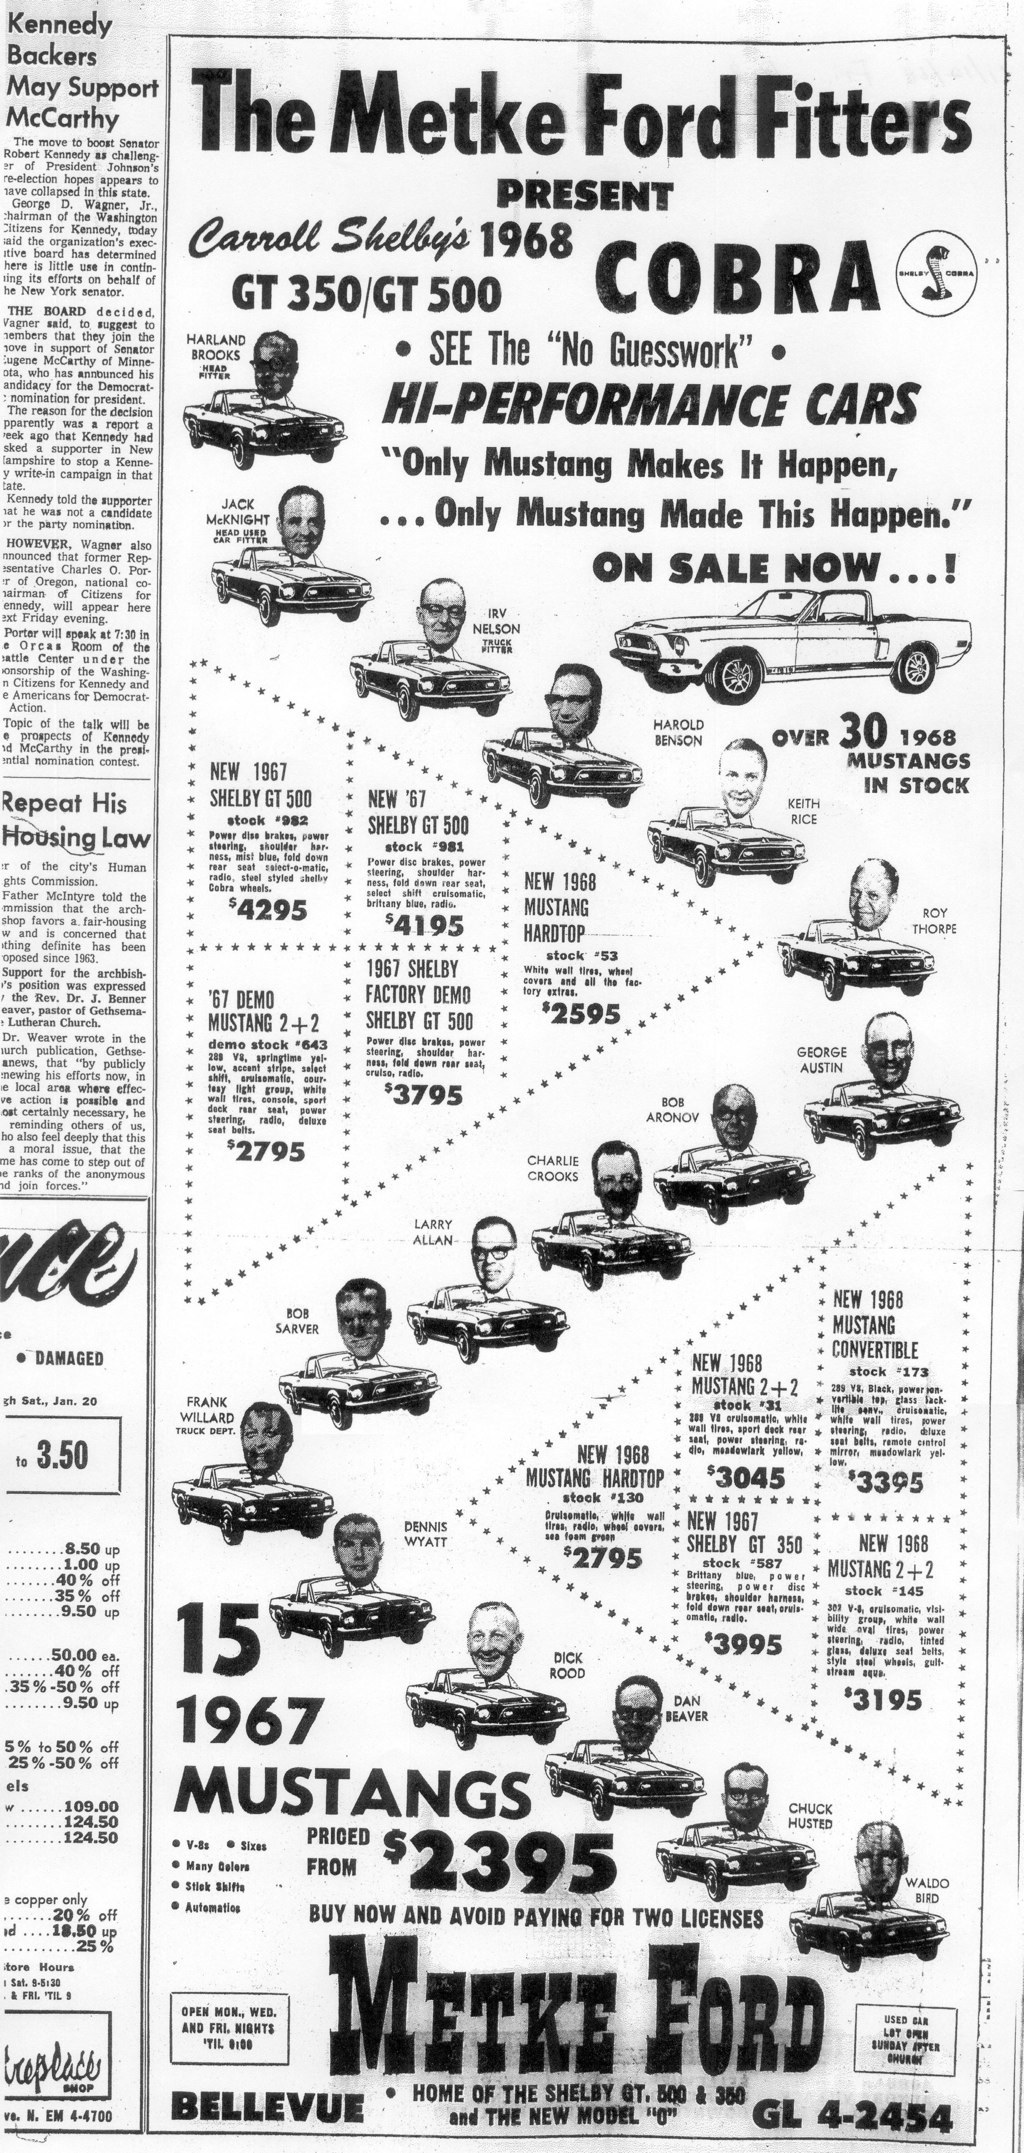 Seattle Times 1968 Shelby Mustang Advertisement